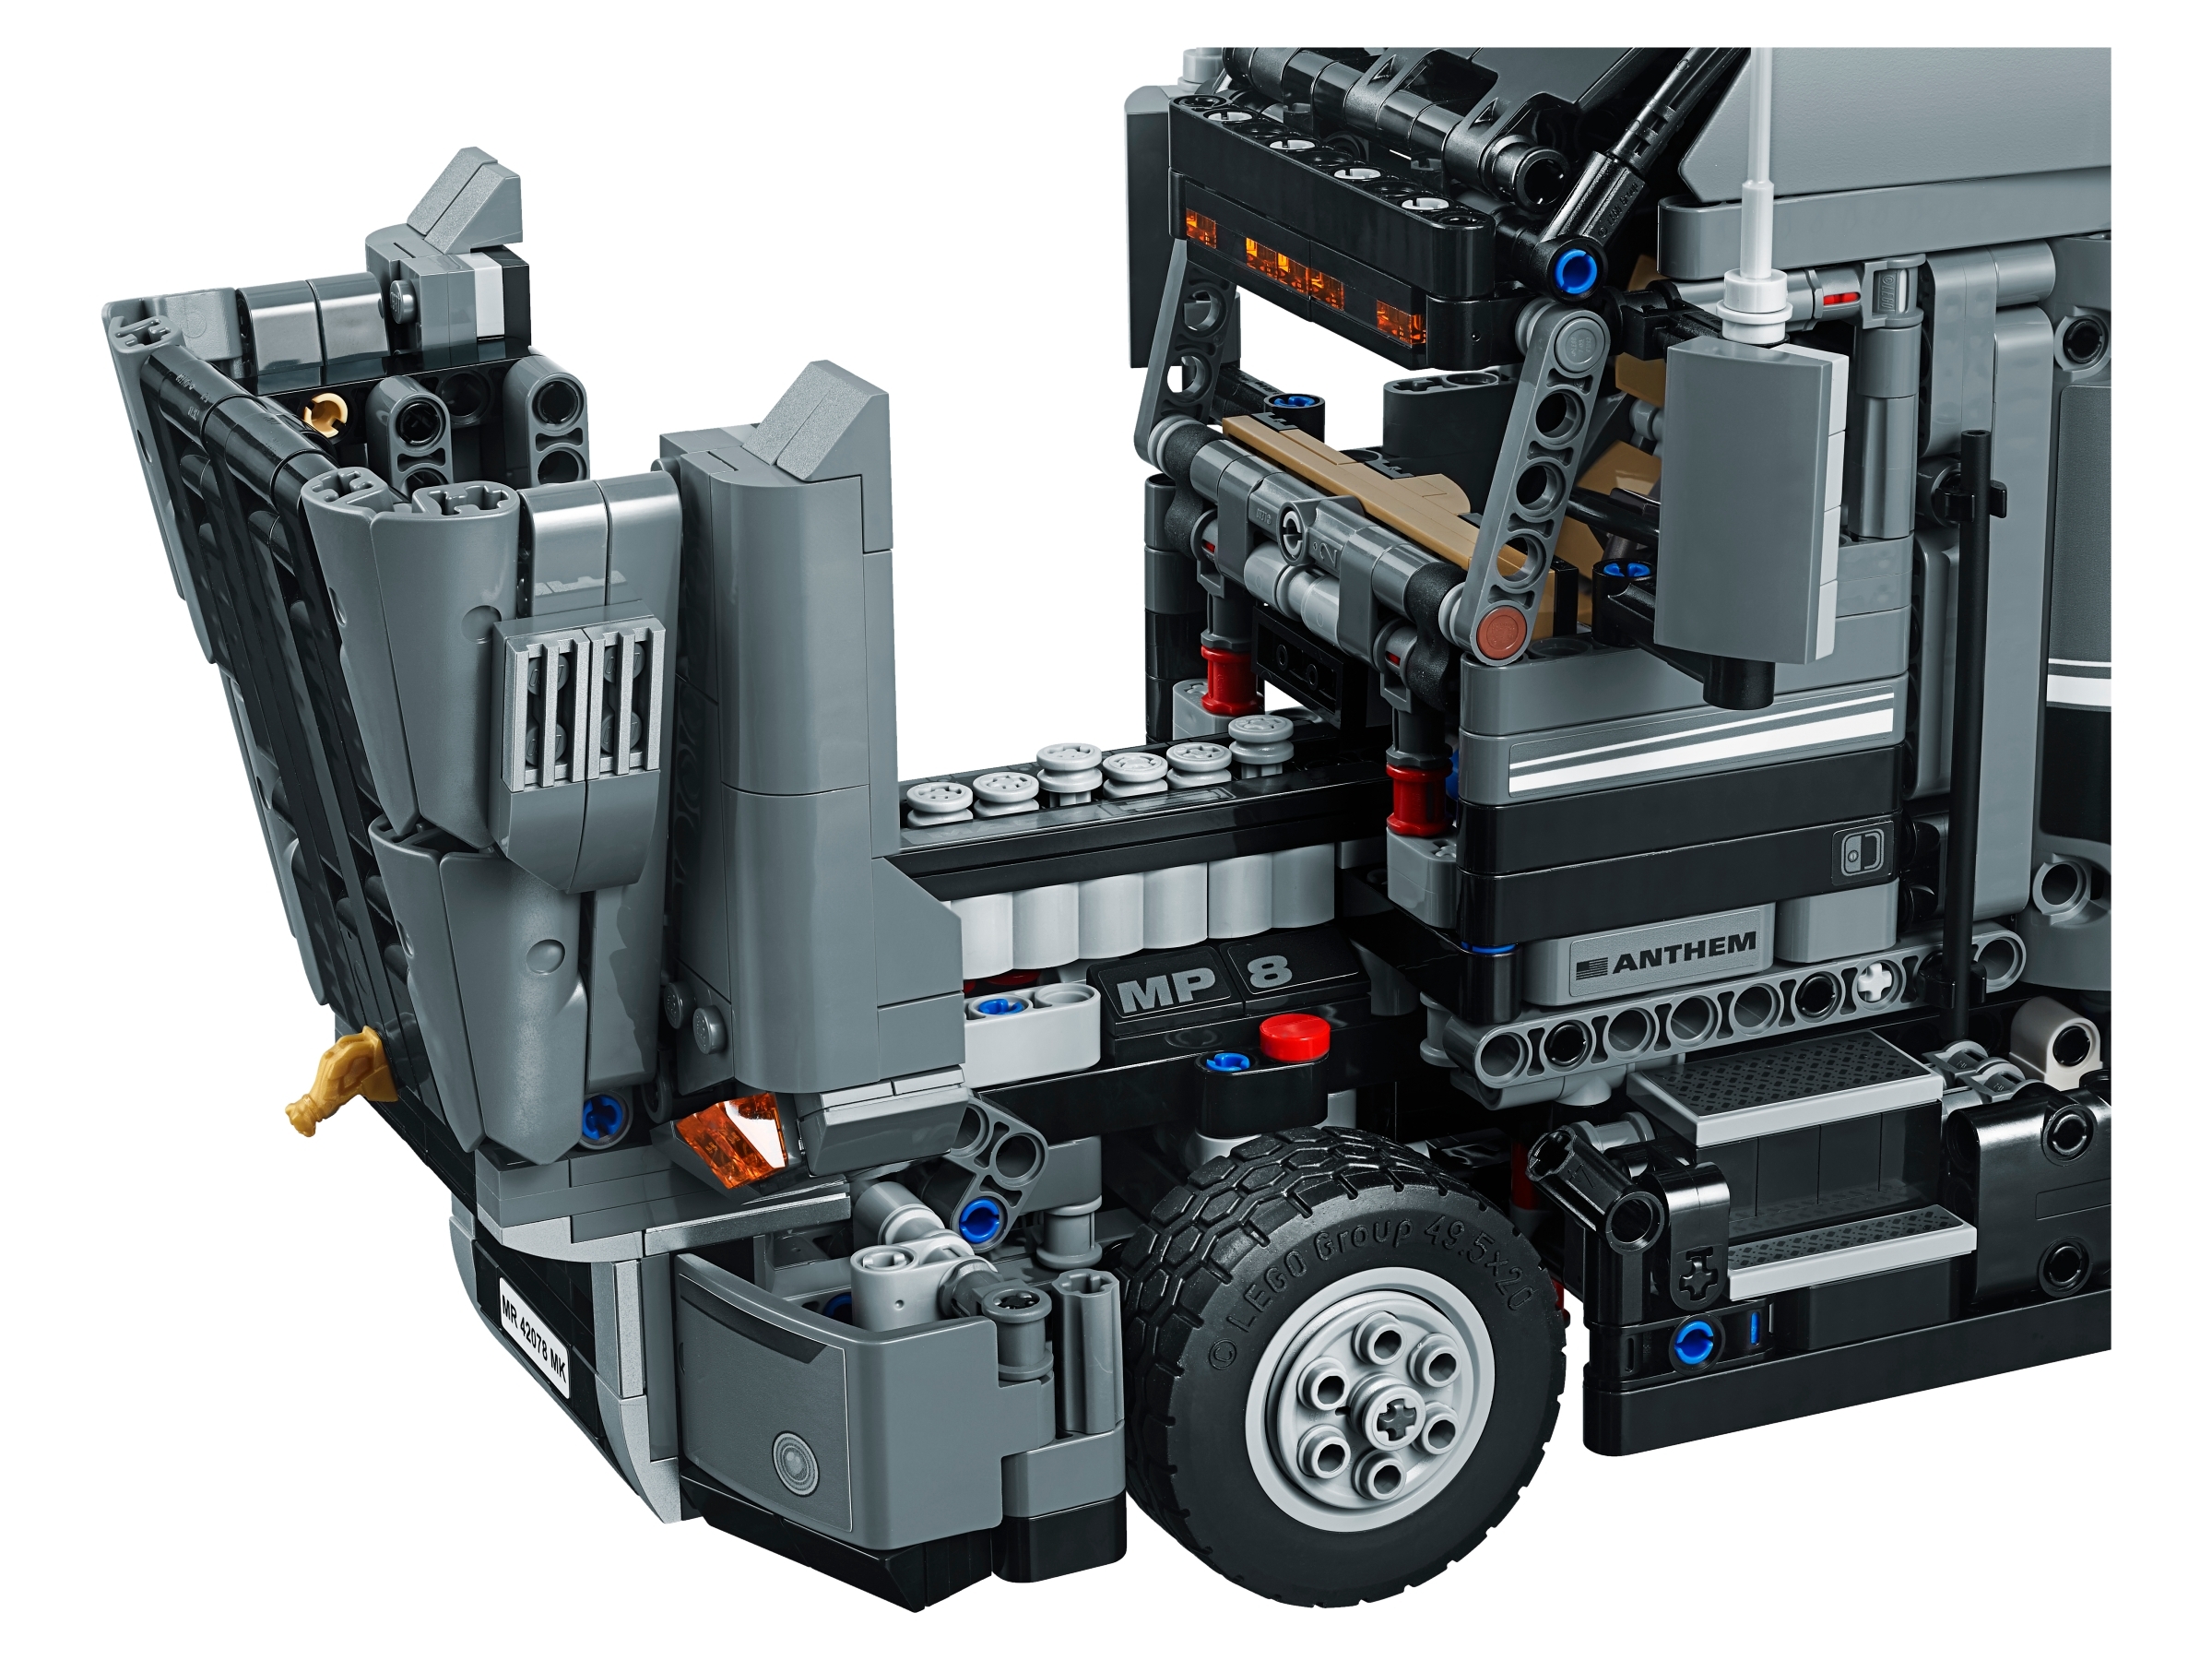 Mack Anthem 42078 | Technic™ | online at the Official LEGO® Shop US